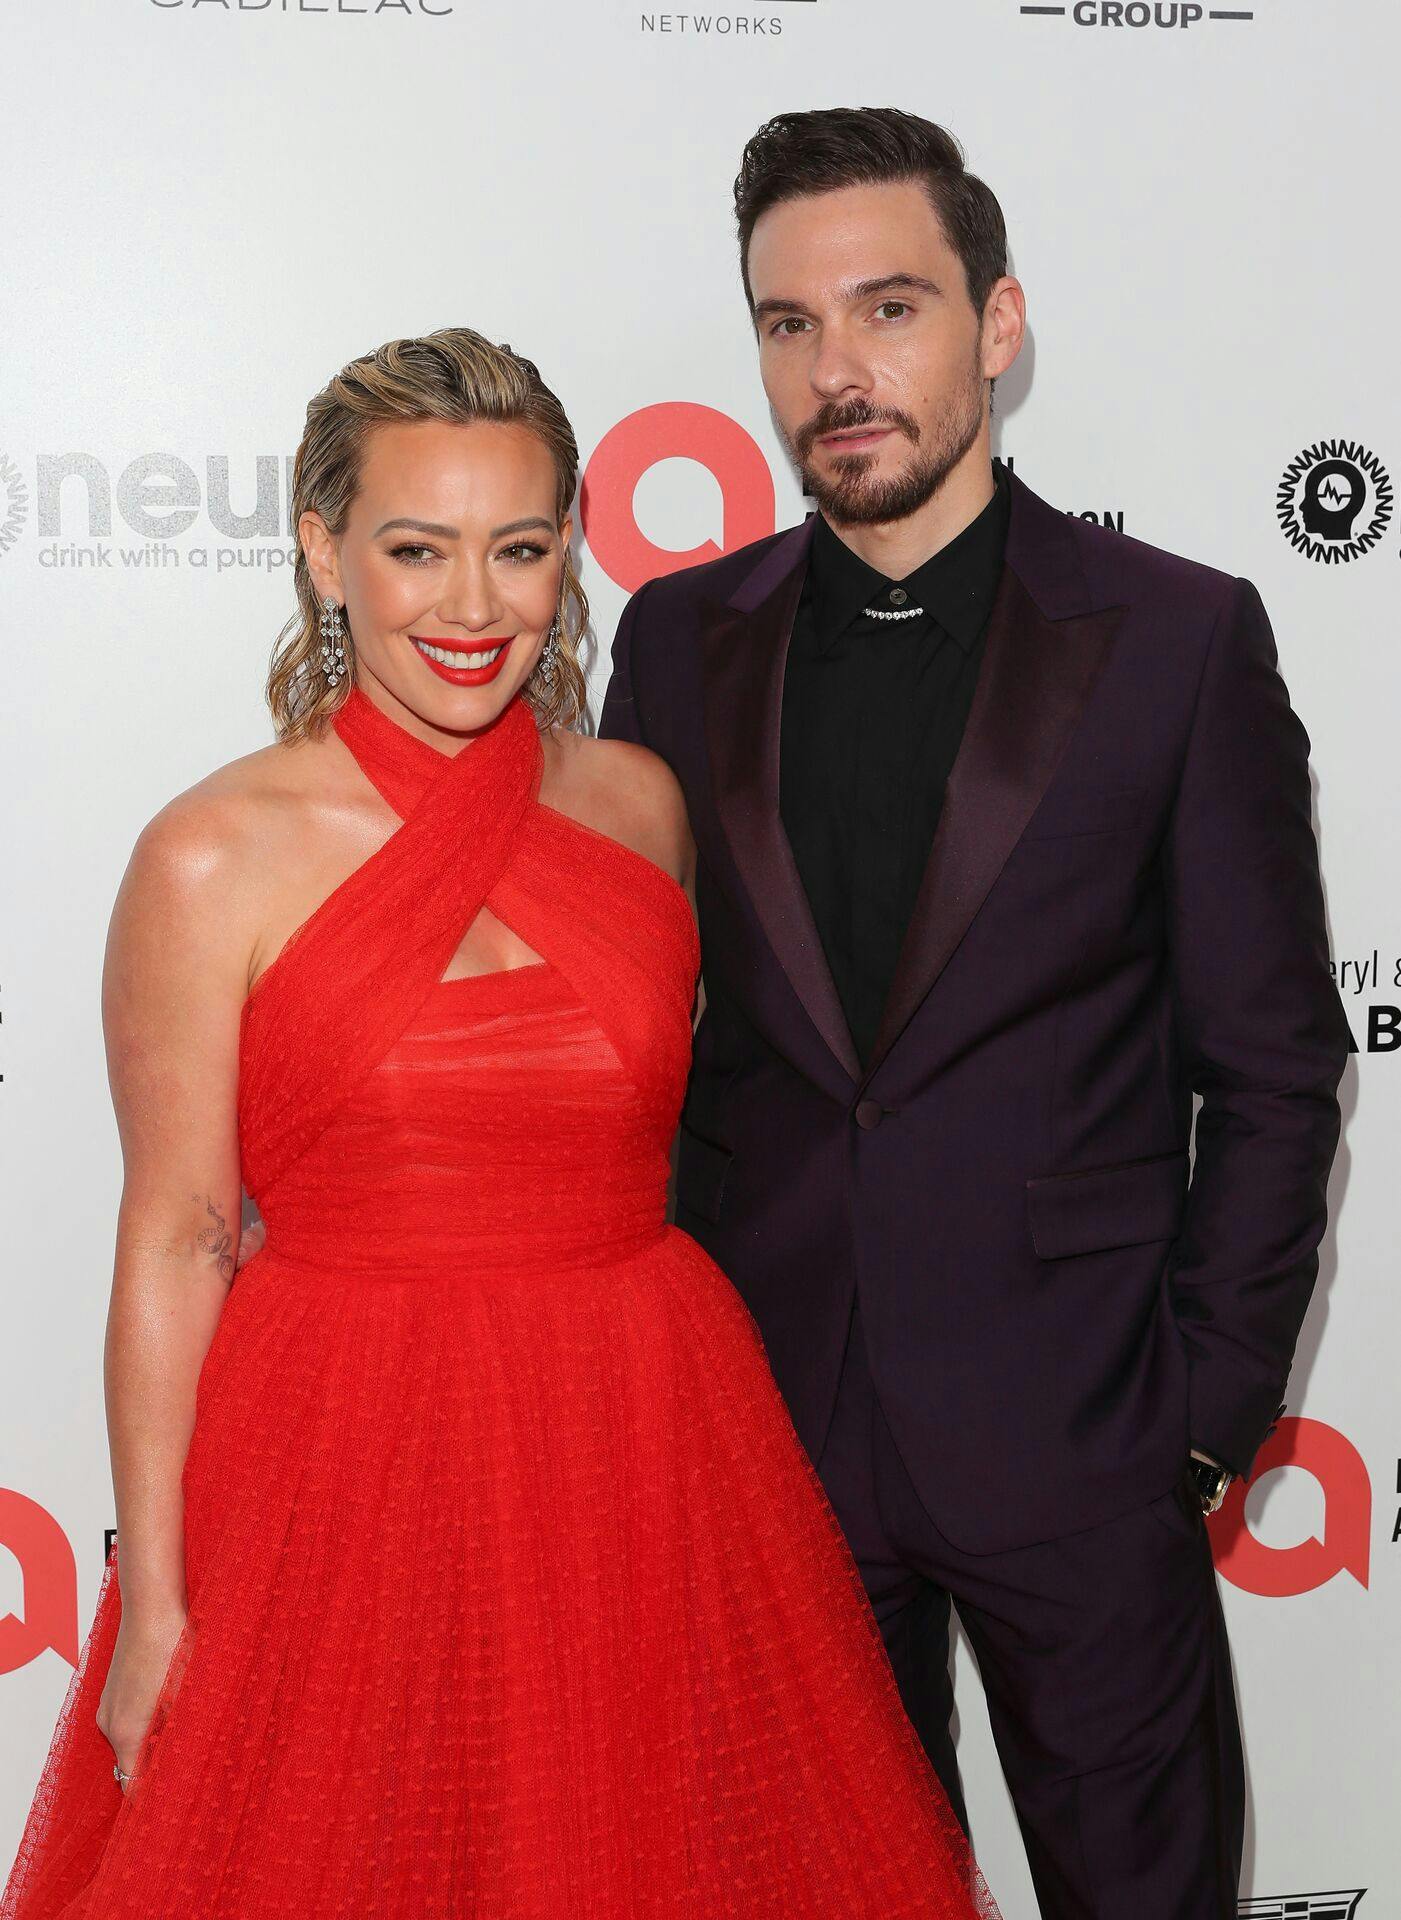 US actress Hilary Duff and her husband, US singer Matthew Koma, attend the Elton John AIDS Foundation's 31st Annual Academy Awards Viewing Party on March 12, 2023, in West Hollywood, California. Jean Baptiste Lacroix / AFP